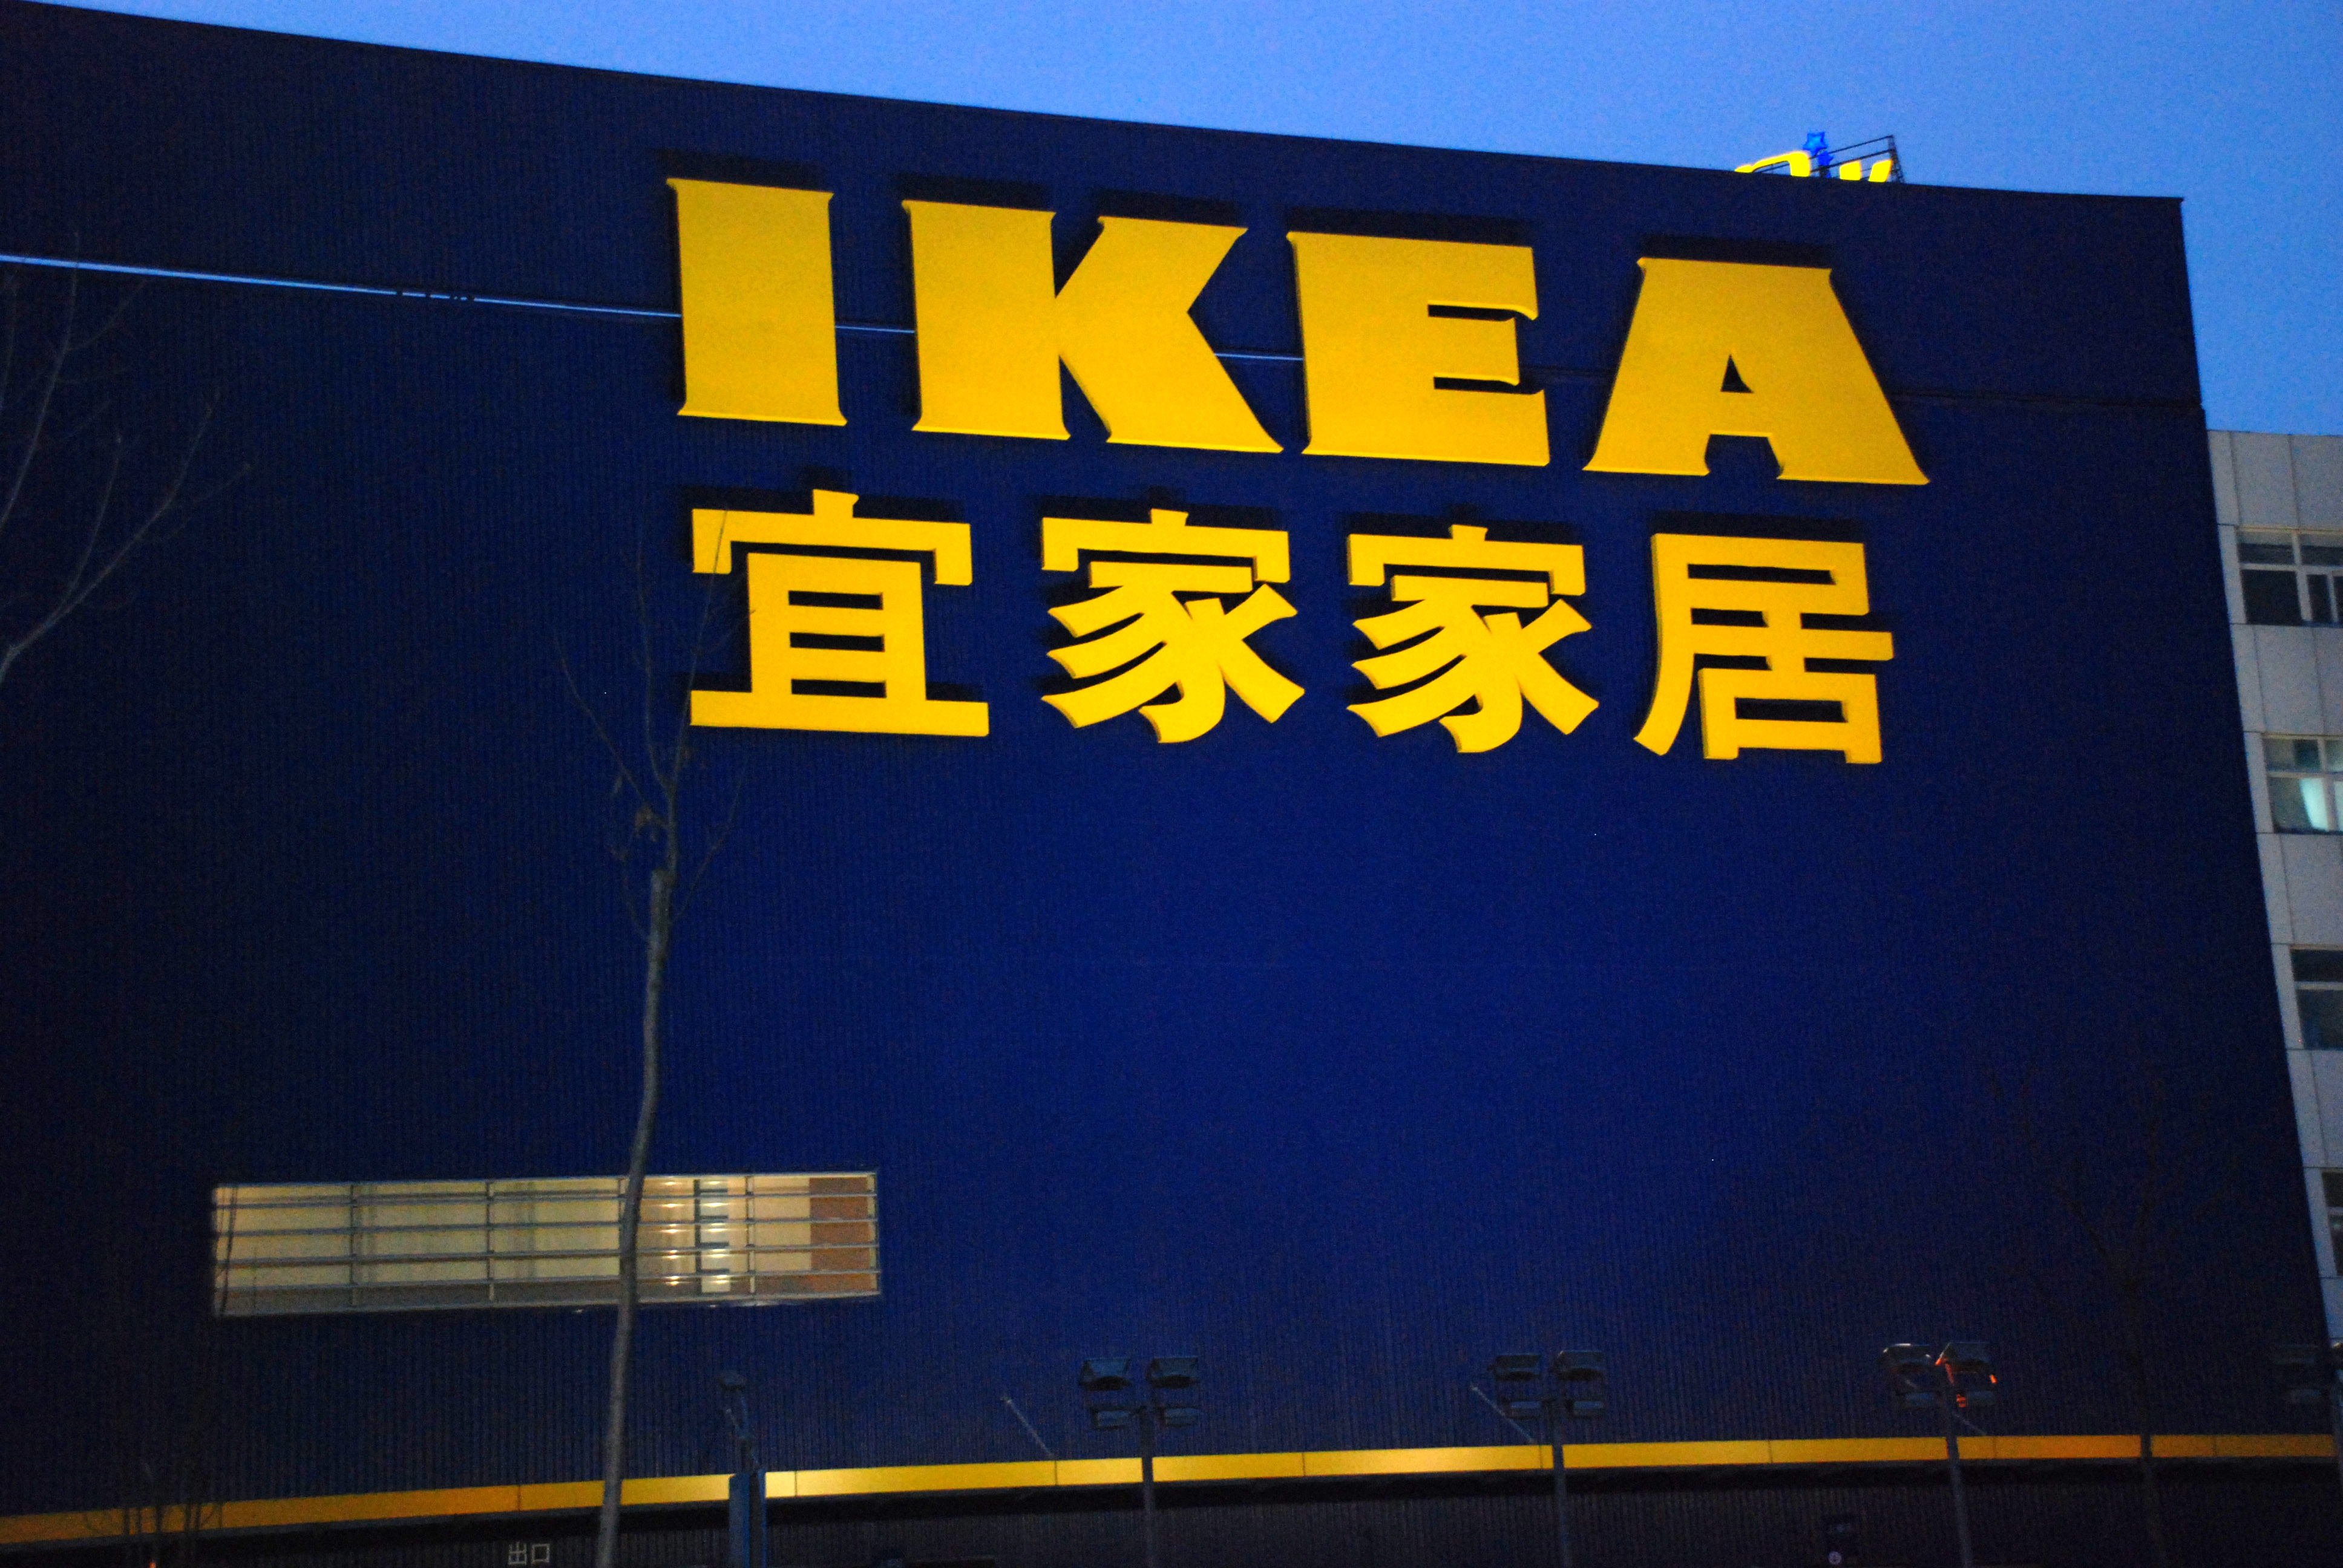 Swedish company to invest millions in Chinese market